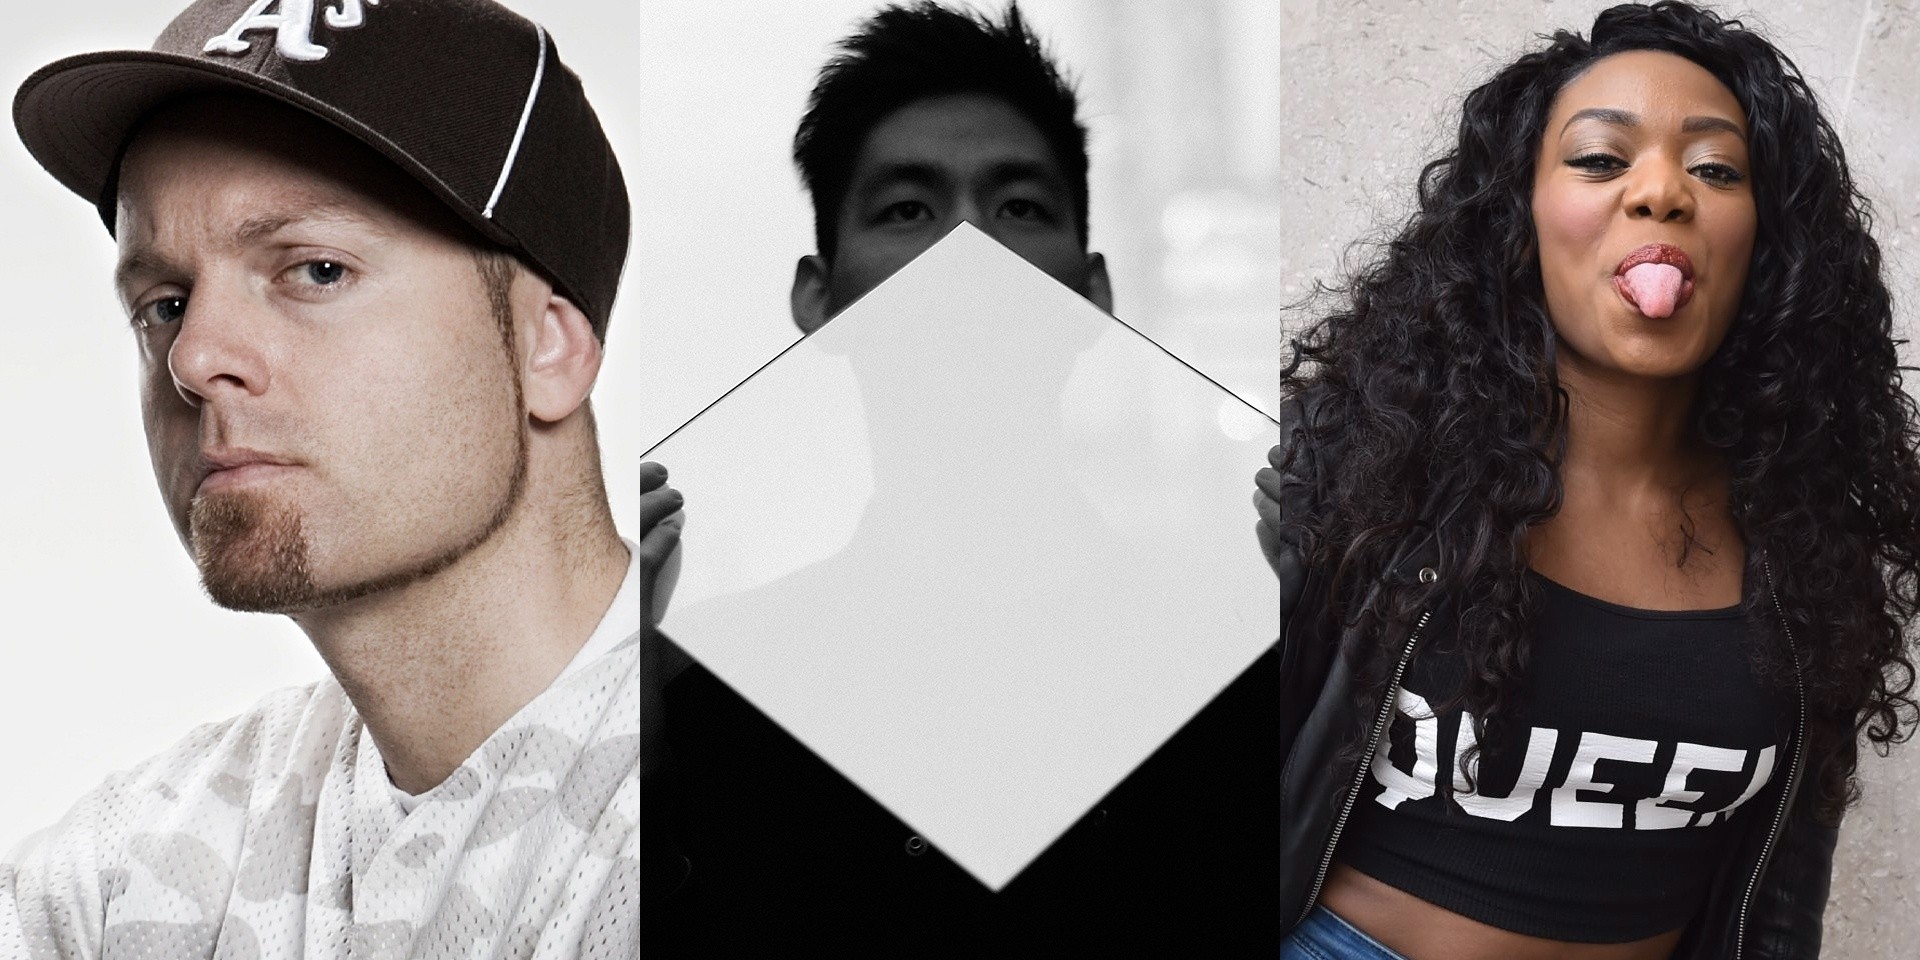 Sónar Hong Kong announce their line-up — DJ Shadow, Nosaj Thing, Lady Leshurr and more to perform